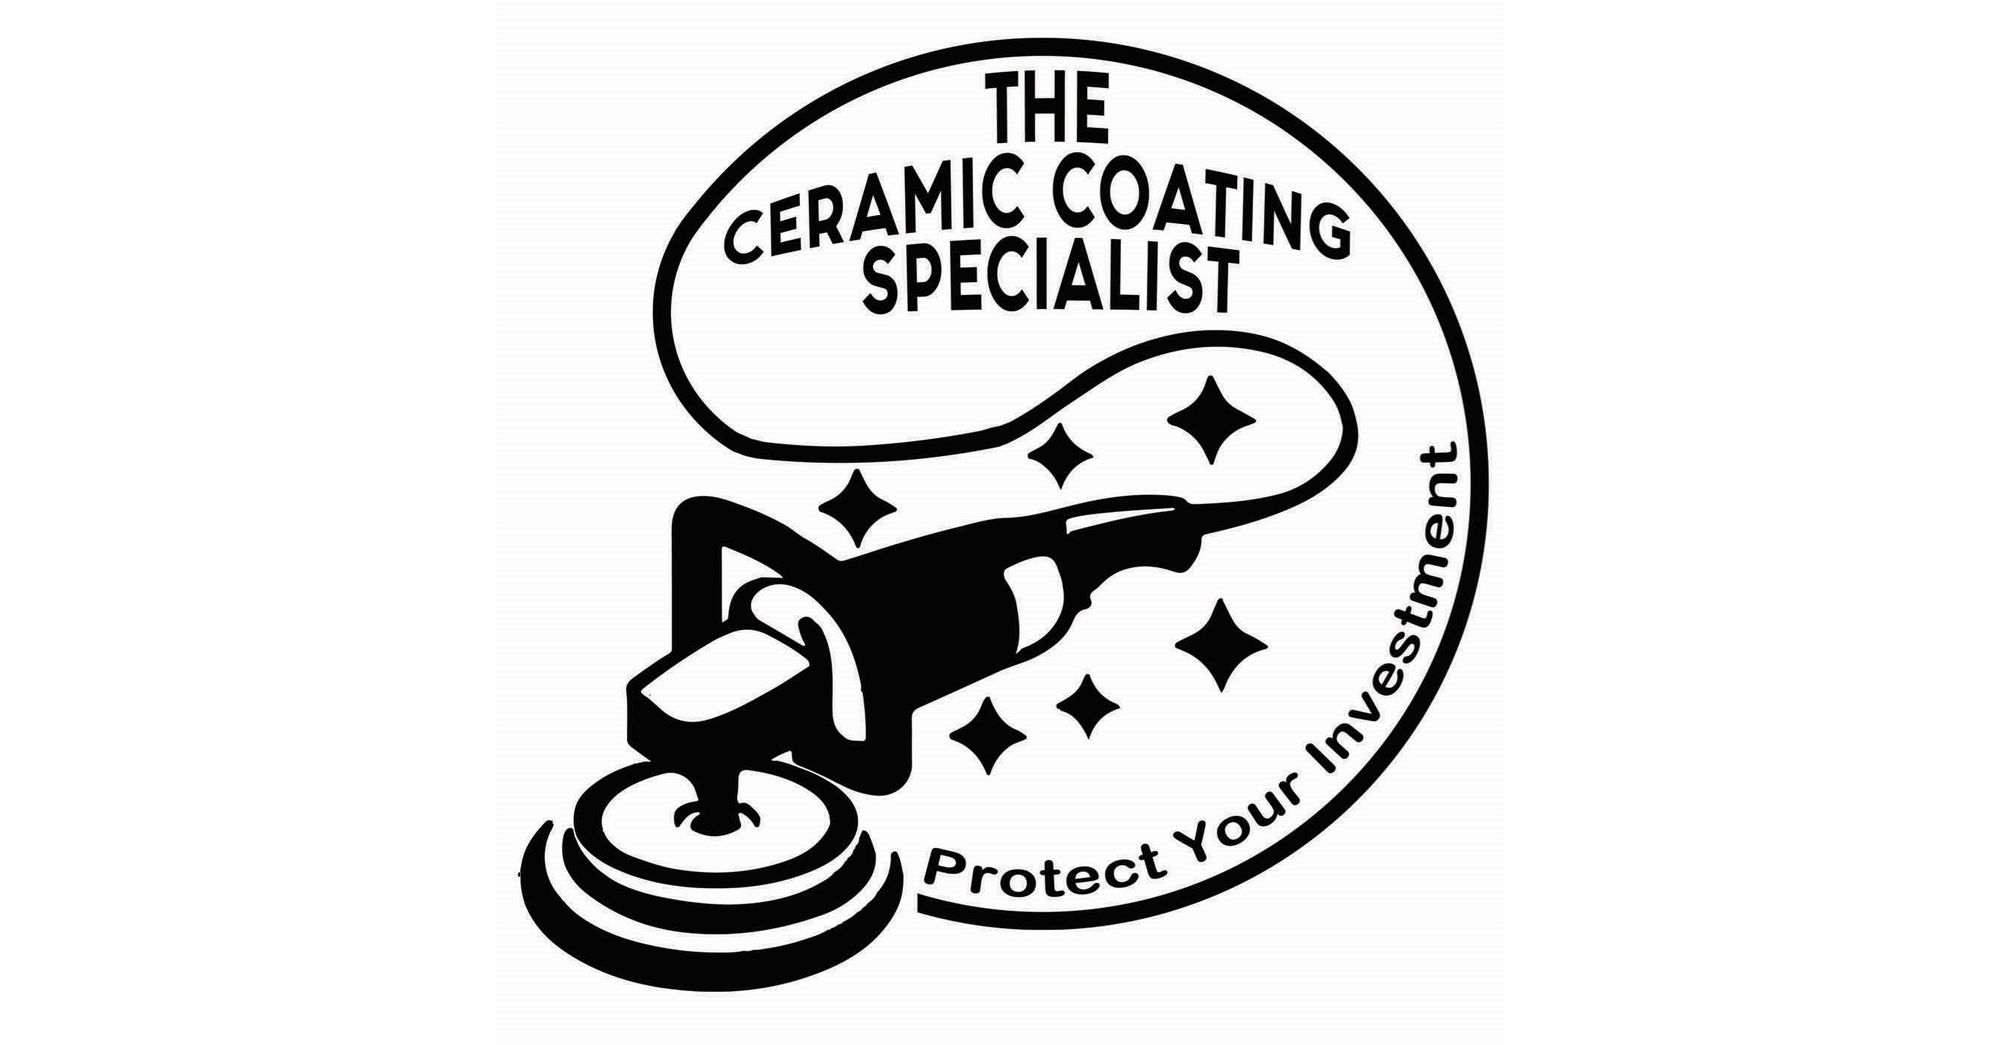 The Ceramic Coating Specialist - Rudhy Morales